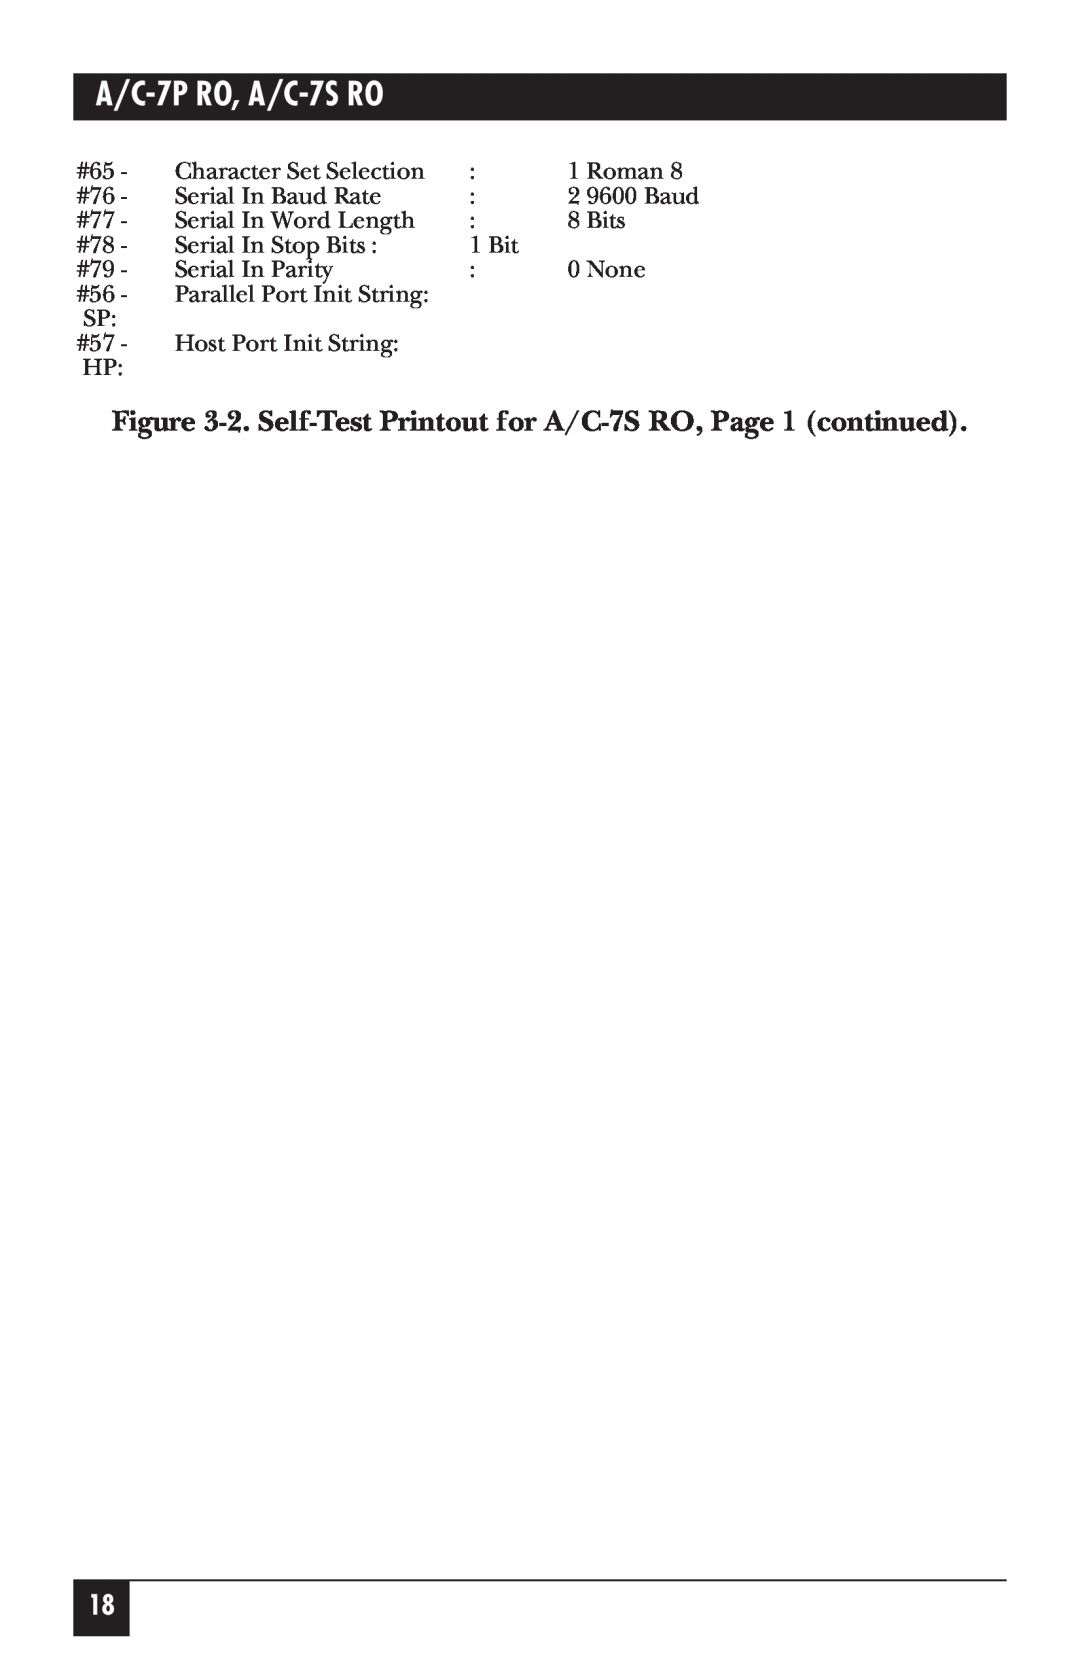 Black Box manual 2. Self-Test Printout for A/C-7S RO, Page 1 continued, A/C-7P RO, A/C-7S RO 